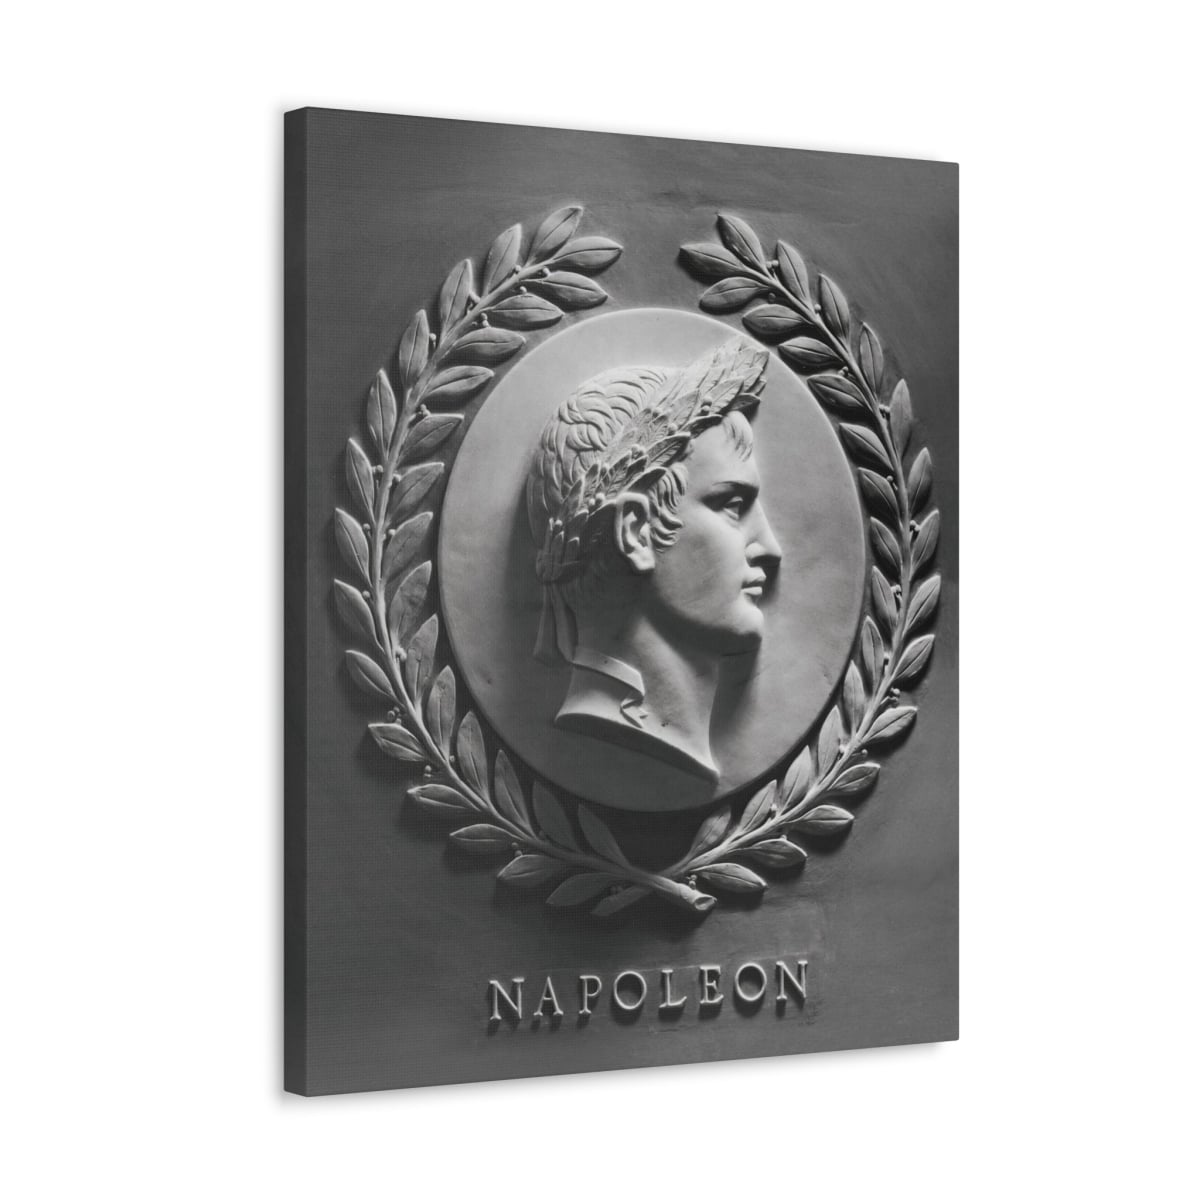 Witness history's brilliance encapsulated in our Napoleon Bonaparte Stone Sculpture